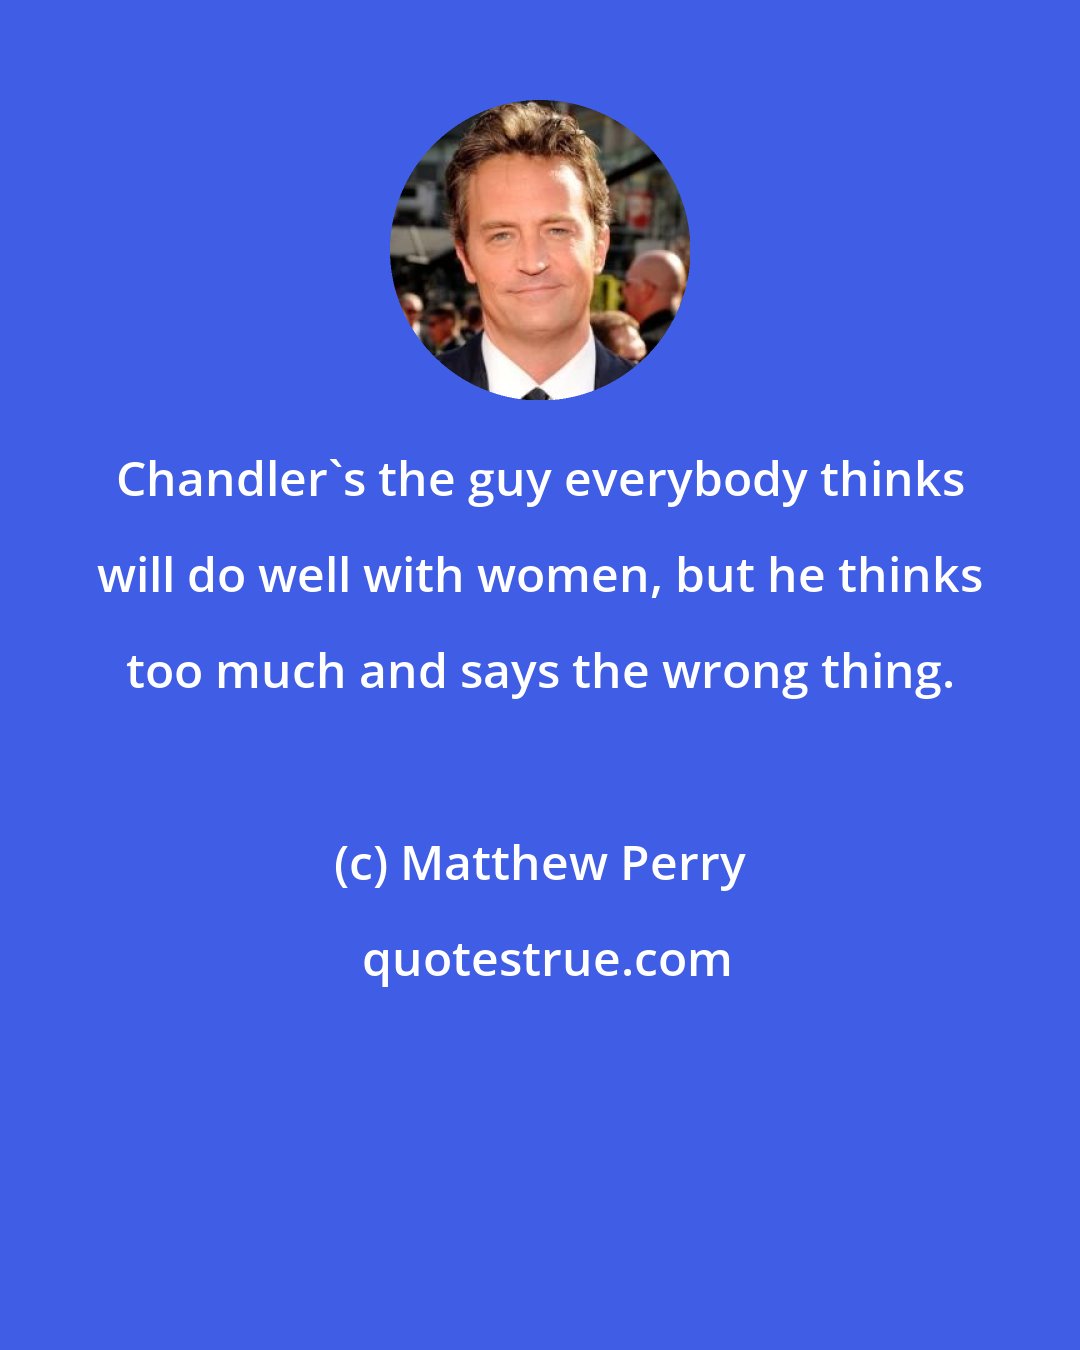 Matthew Perry: Chandler's the guy everybody thinks will do well with women, but he thinks too much and says the wrong thing.